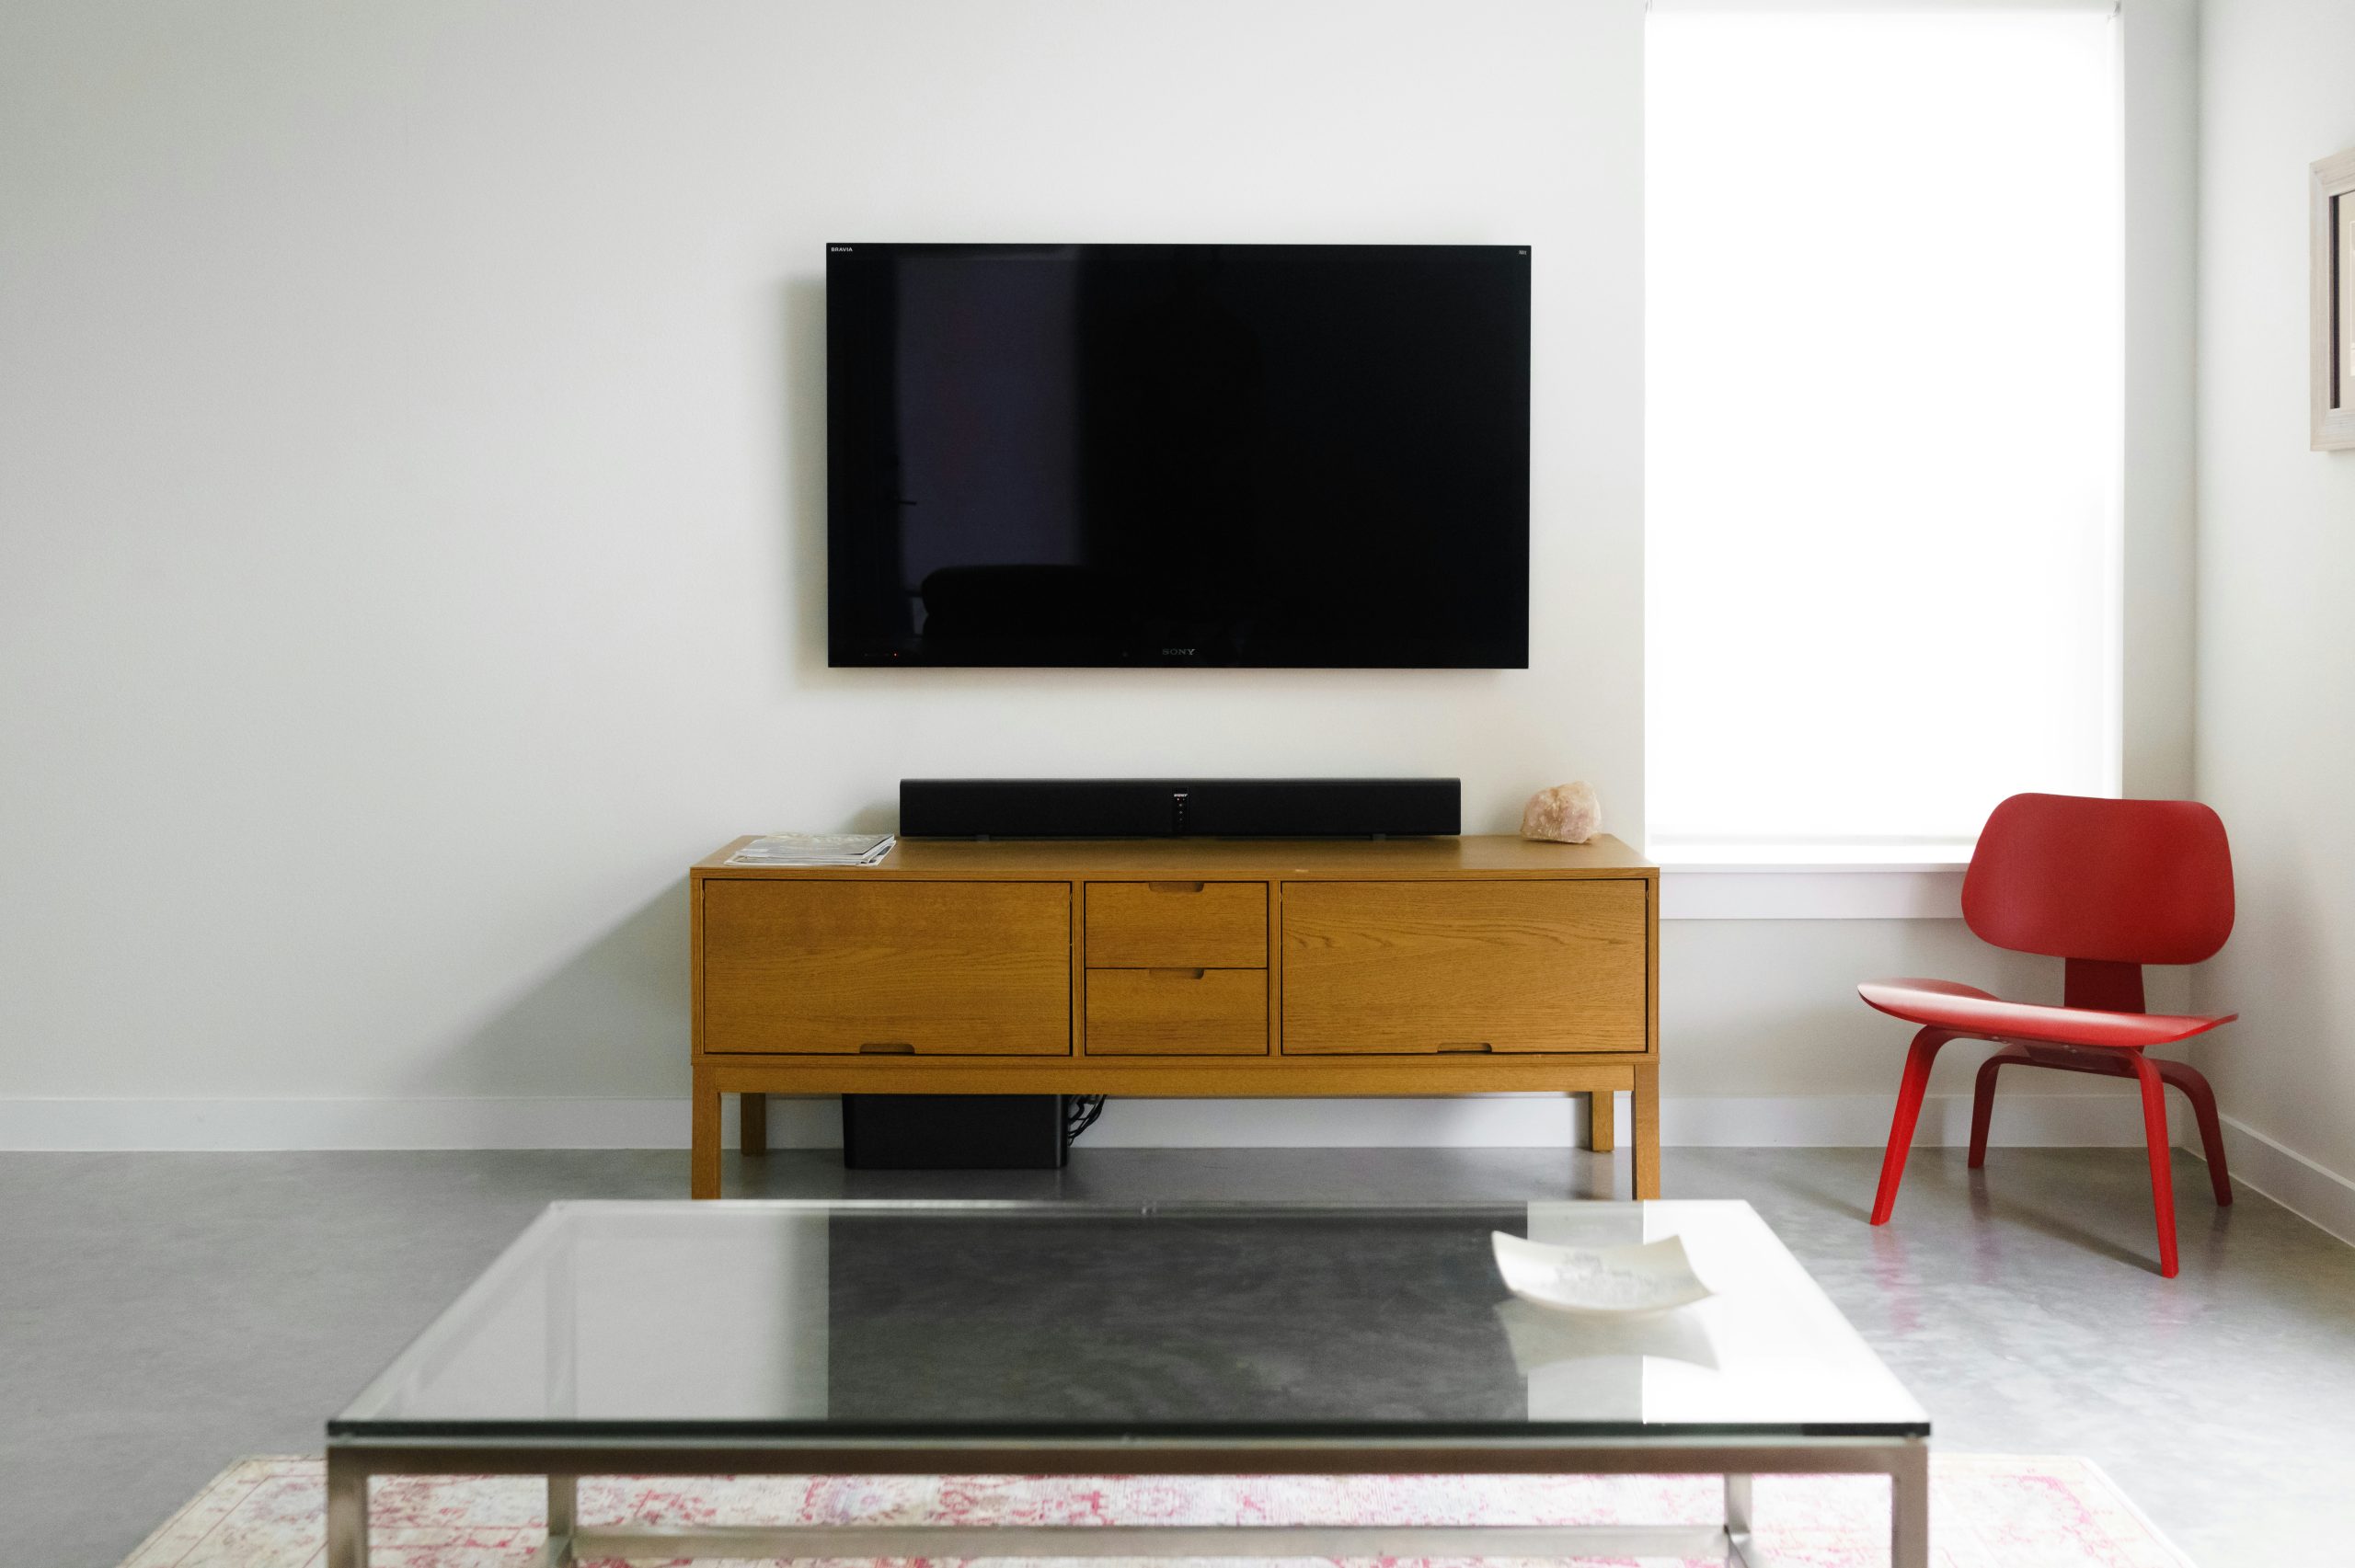 find the perfect tv stand to complement your living room decor. explore our wide selection of tv stands in different styles and finishes.